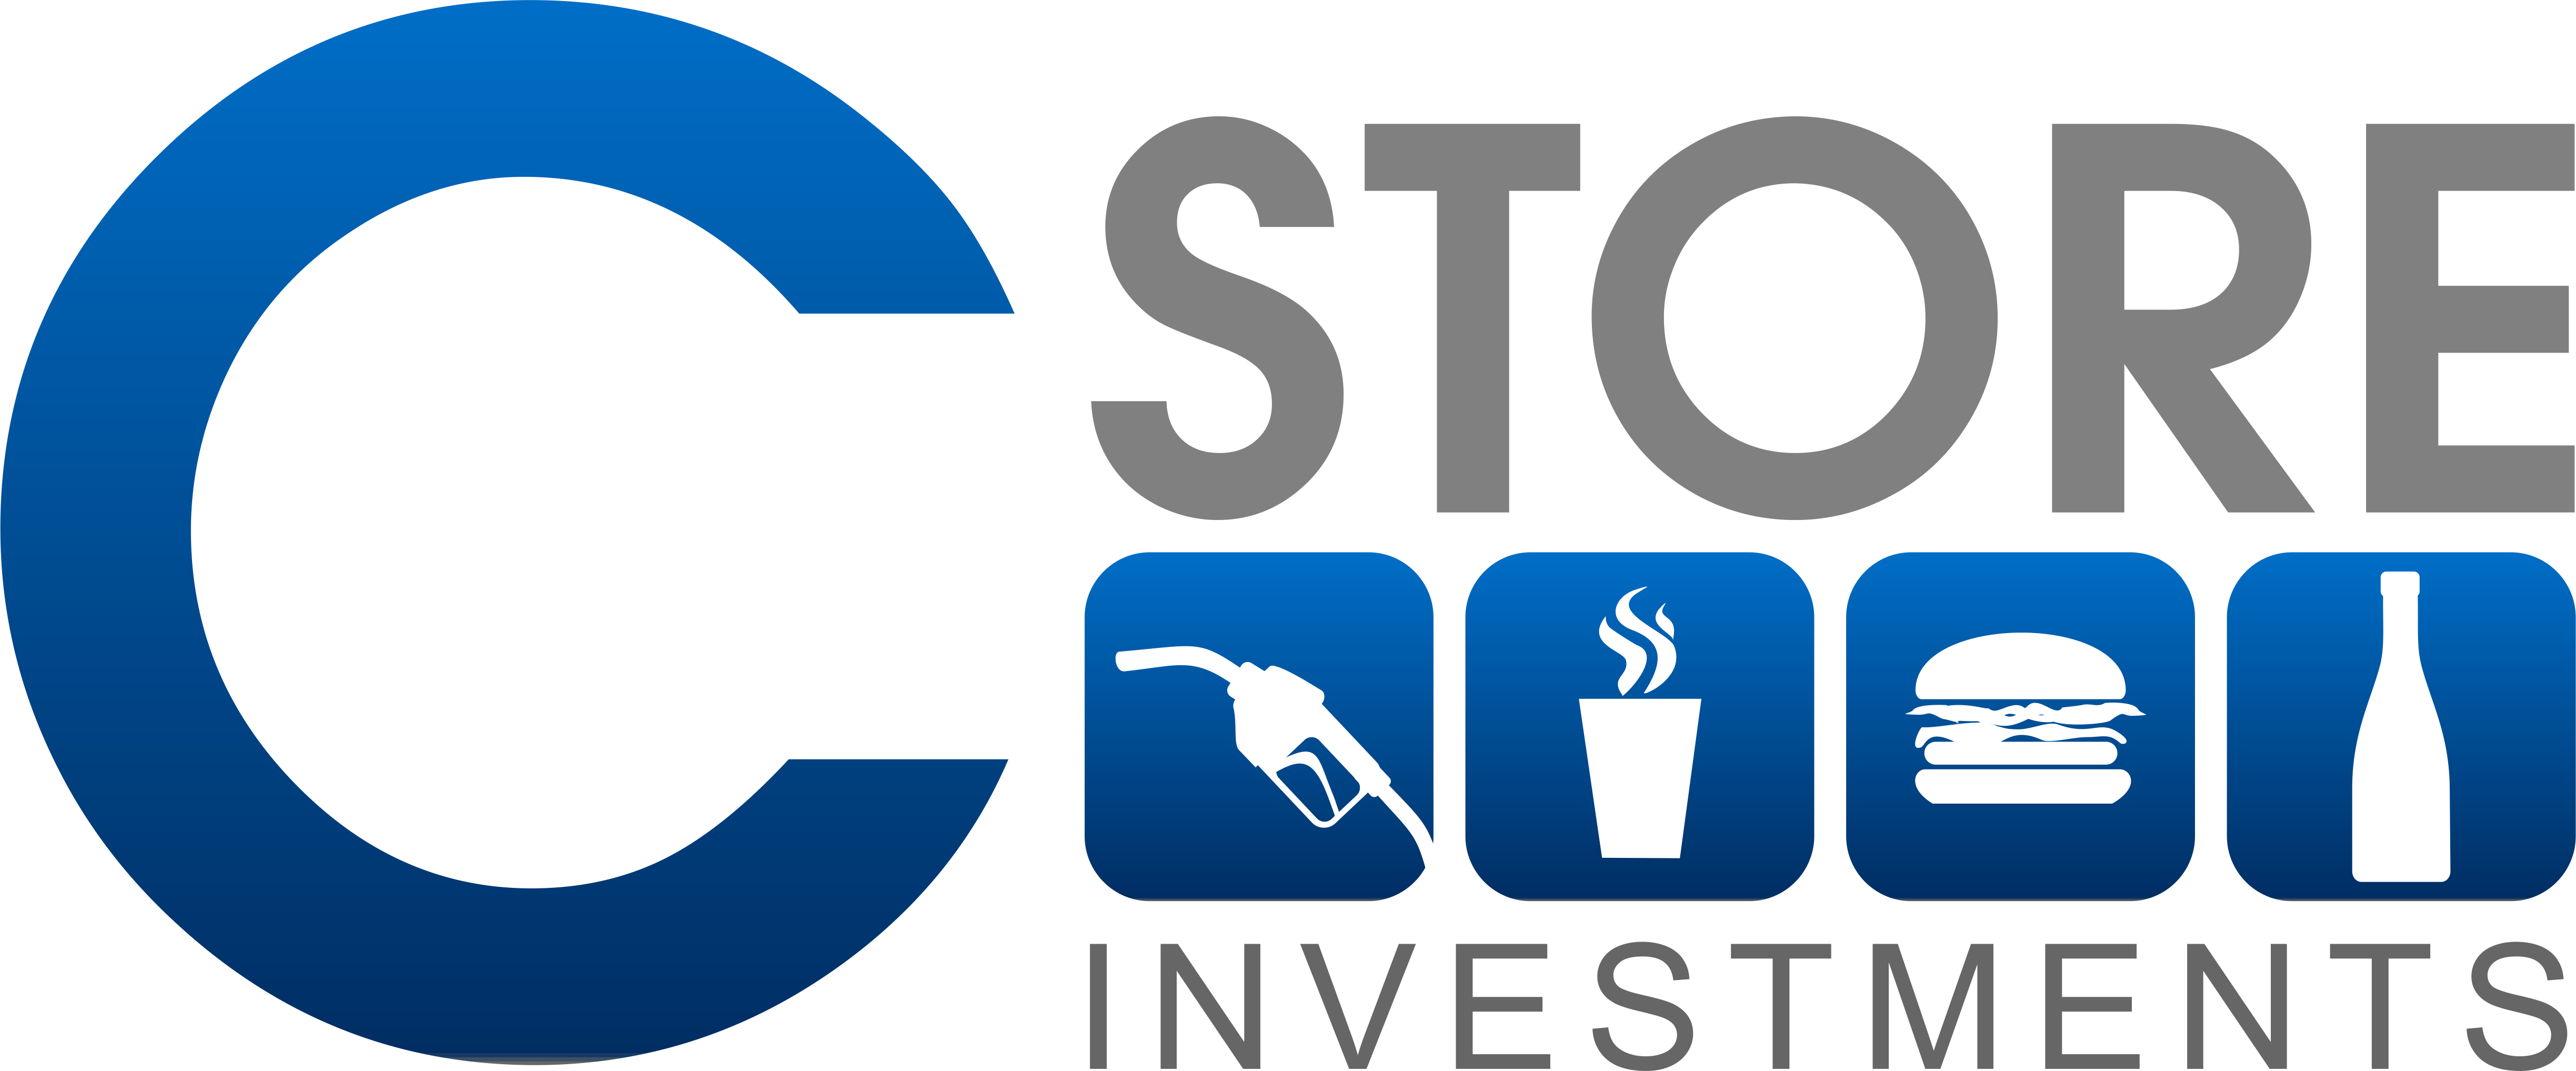 C Store Investments Logo